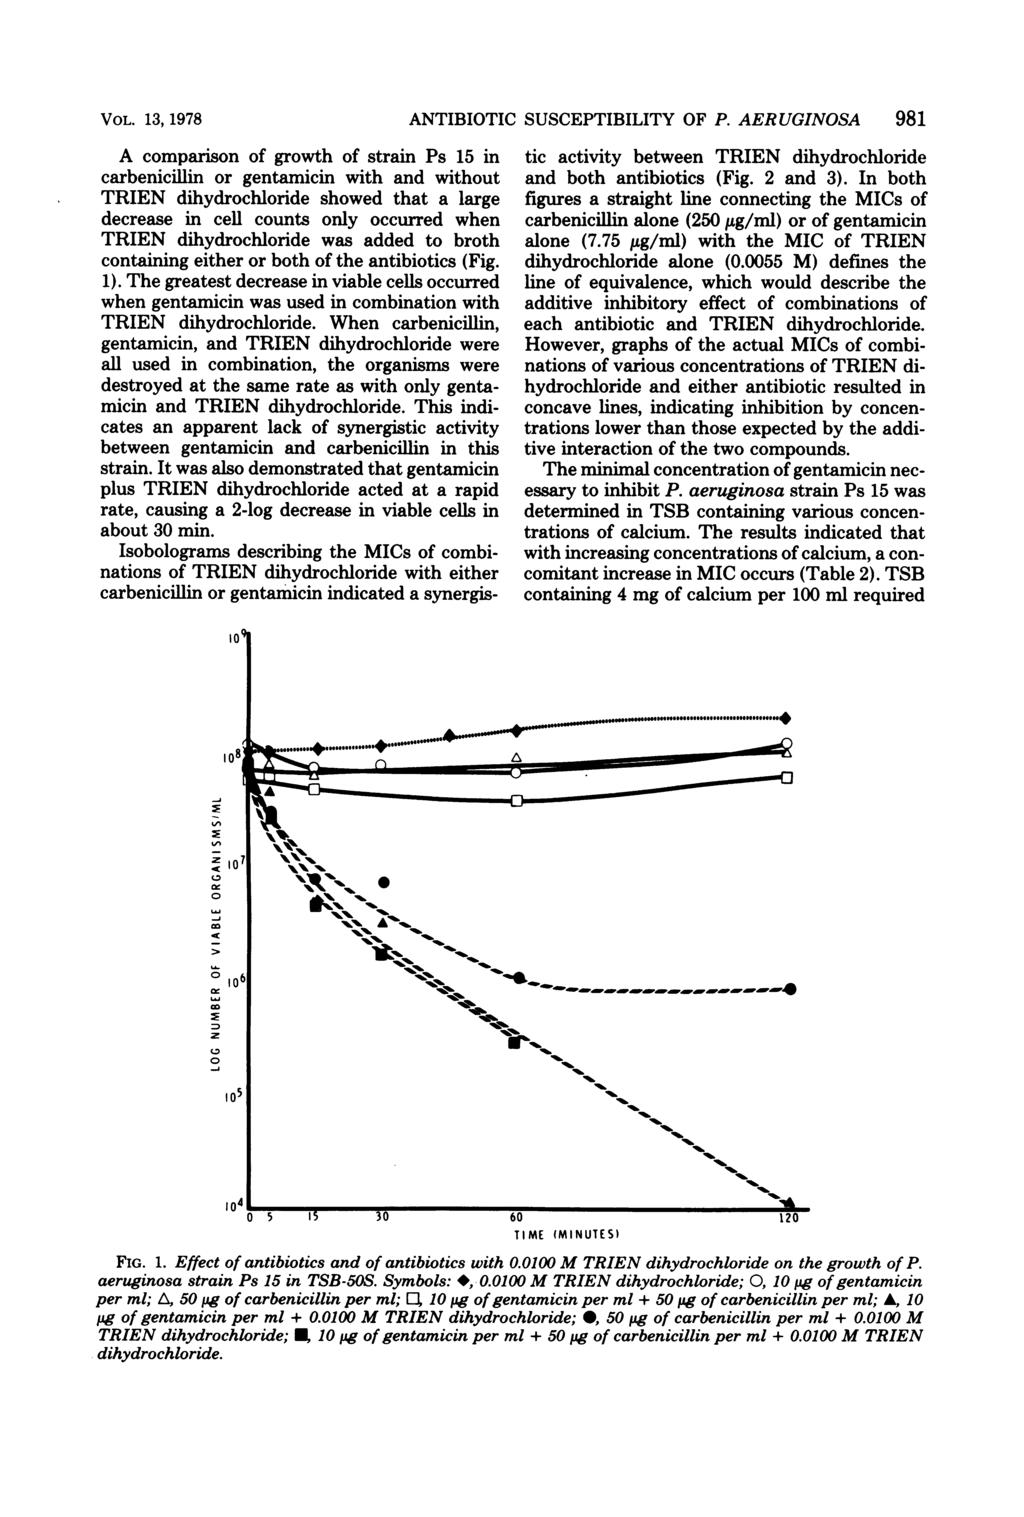 VOL. 13, 1978 A comparison of growth of strain Ps 15 in carbenicillin or gentamicin with and without TRIEN dihydrochloride showed that a large decrease in cell counts only occurred when TRIEN